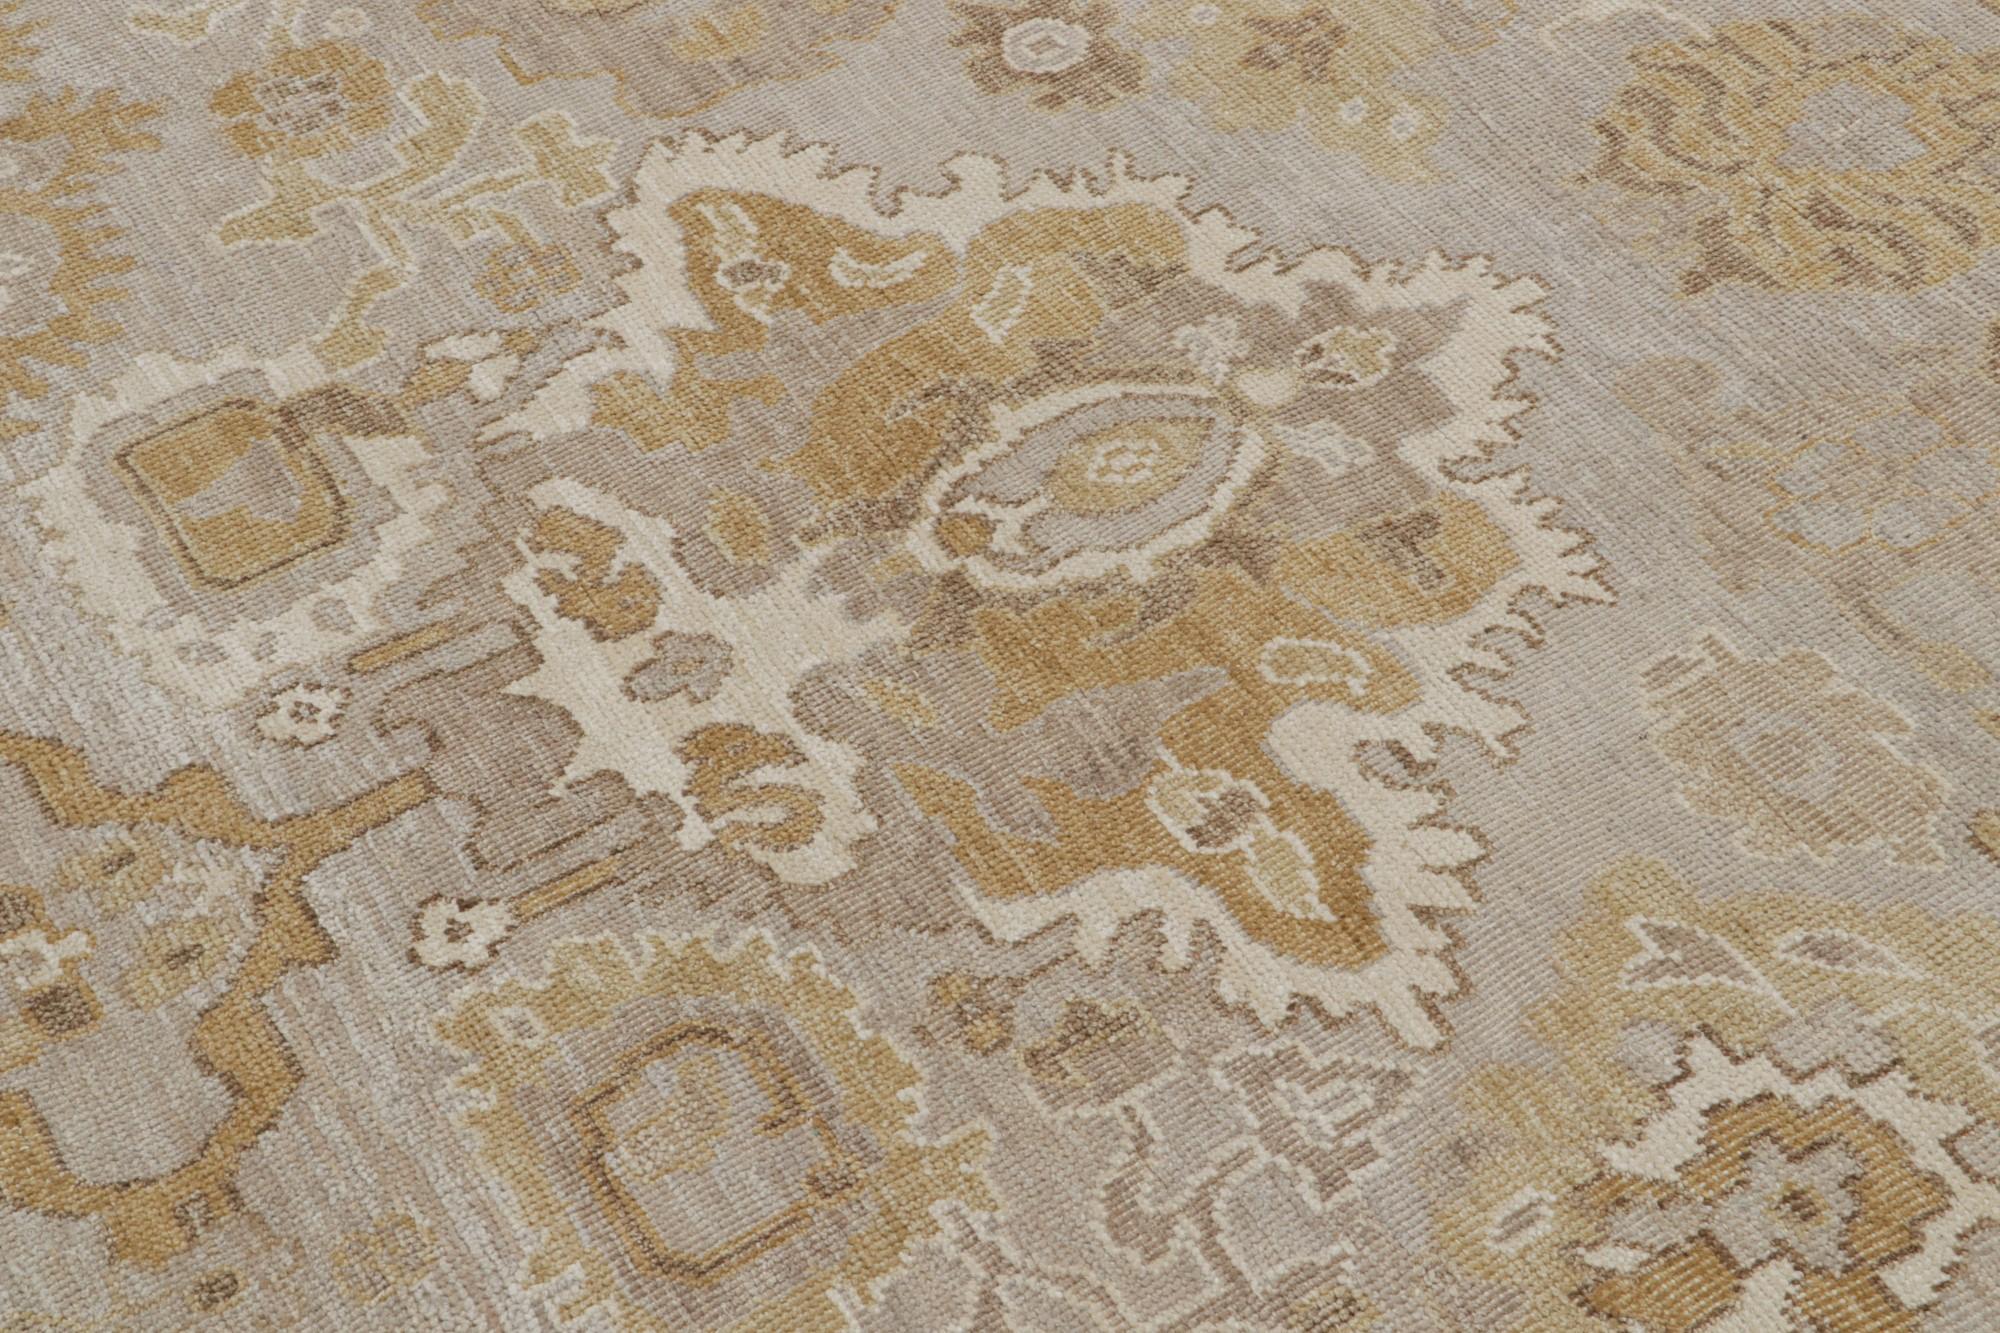 Contemporary Rug & Kilim’s Oushak Style Rug in Beige-Brown & Gold Floral Pattern For Sale